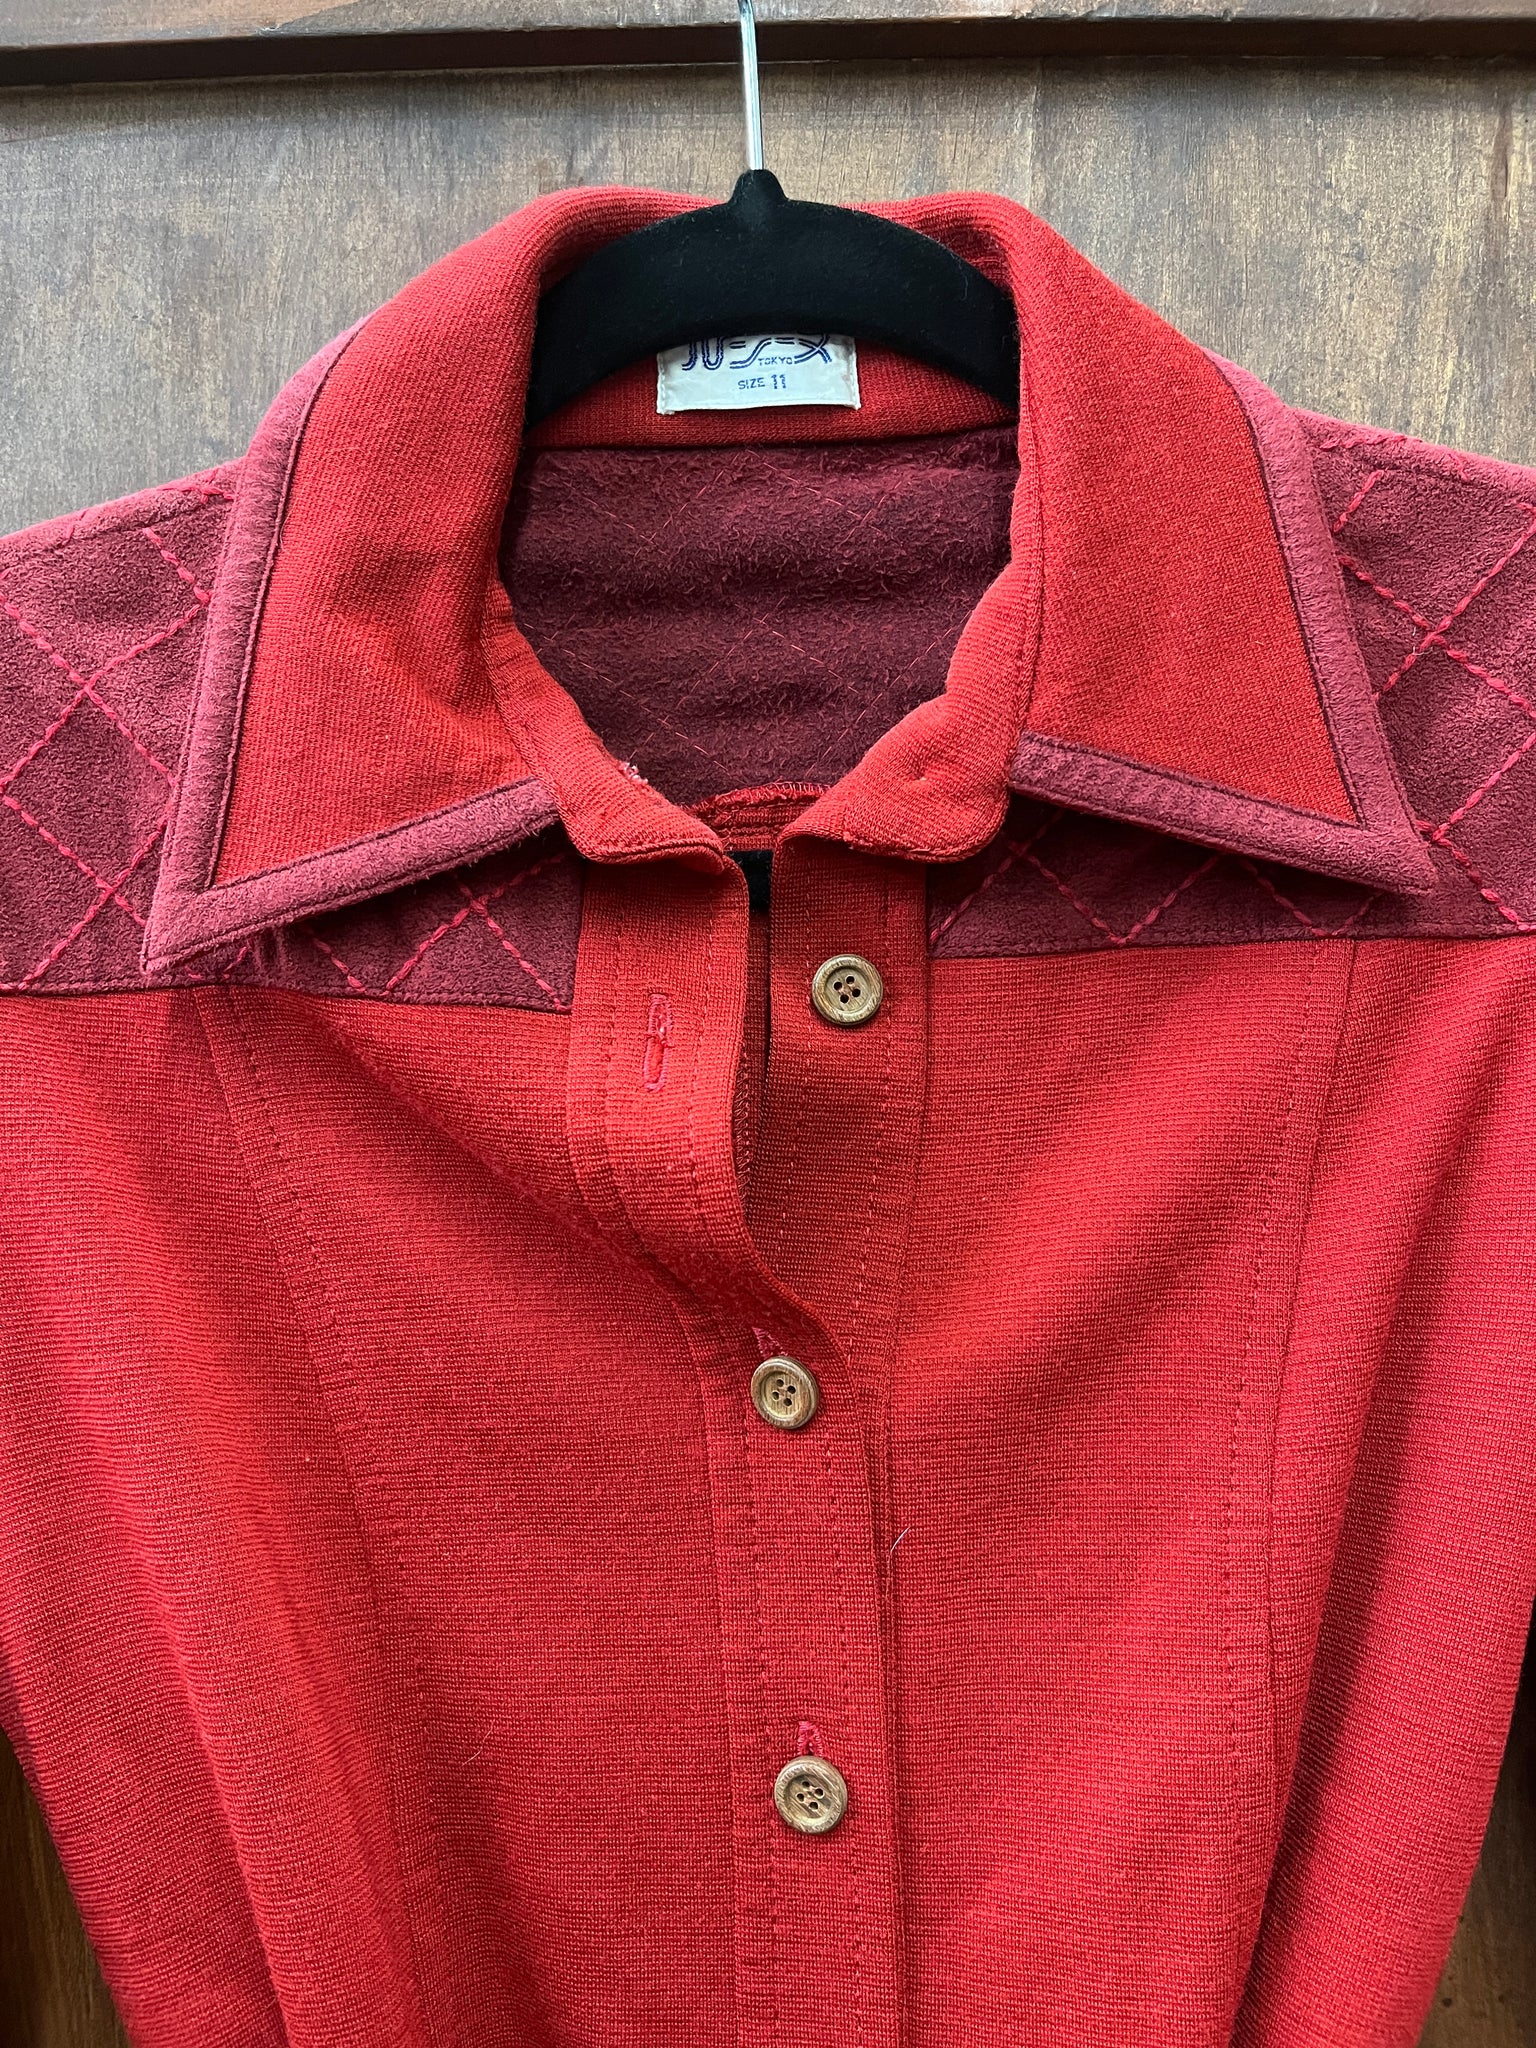 1970s SWEATER- Ju Le Tokyo- cherry red burgundy wood buttons tie at waist